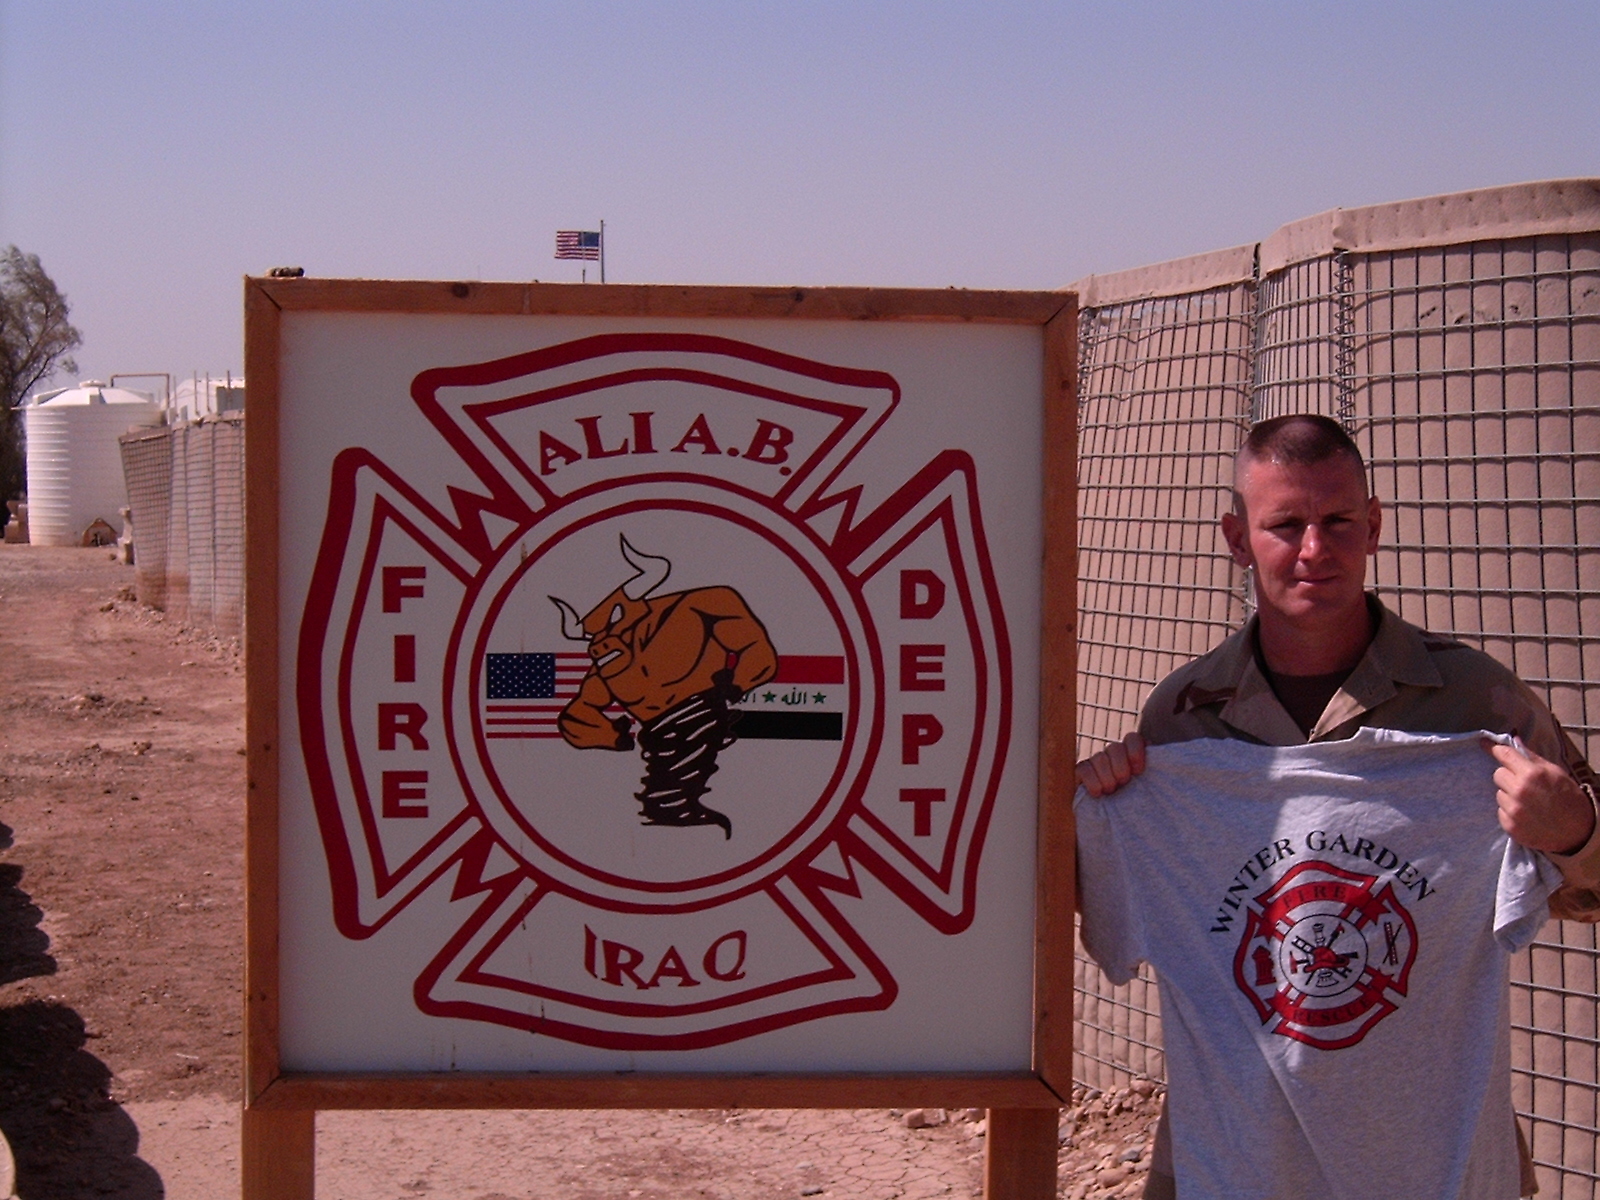 U.S. Air Force Master Sgt. Ken Moisan took a Winter Garden Fire Rescue T-shirt while on deployment in Iraq.